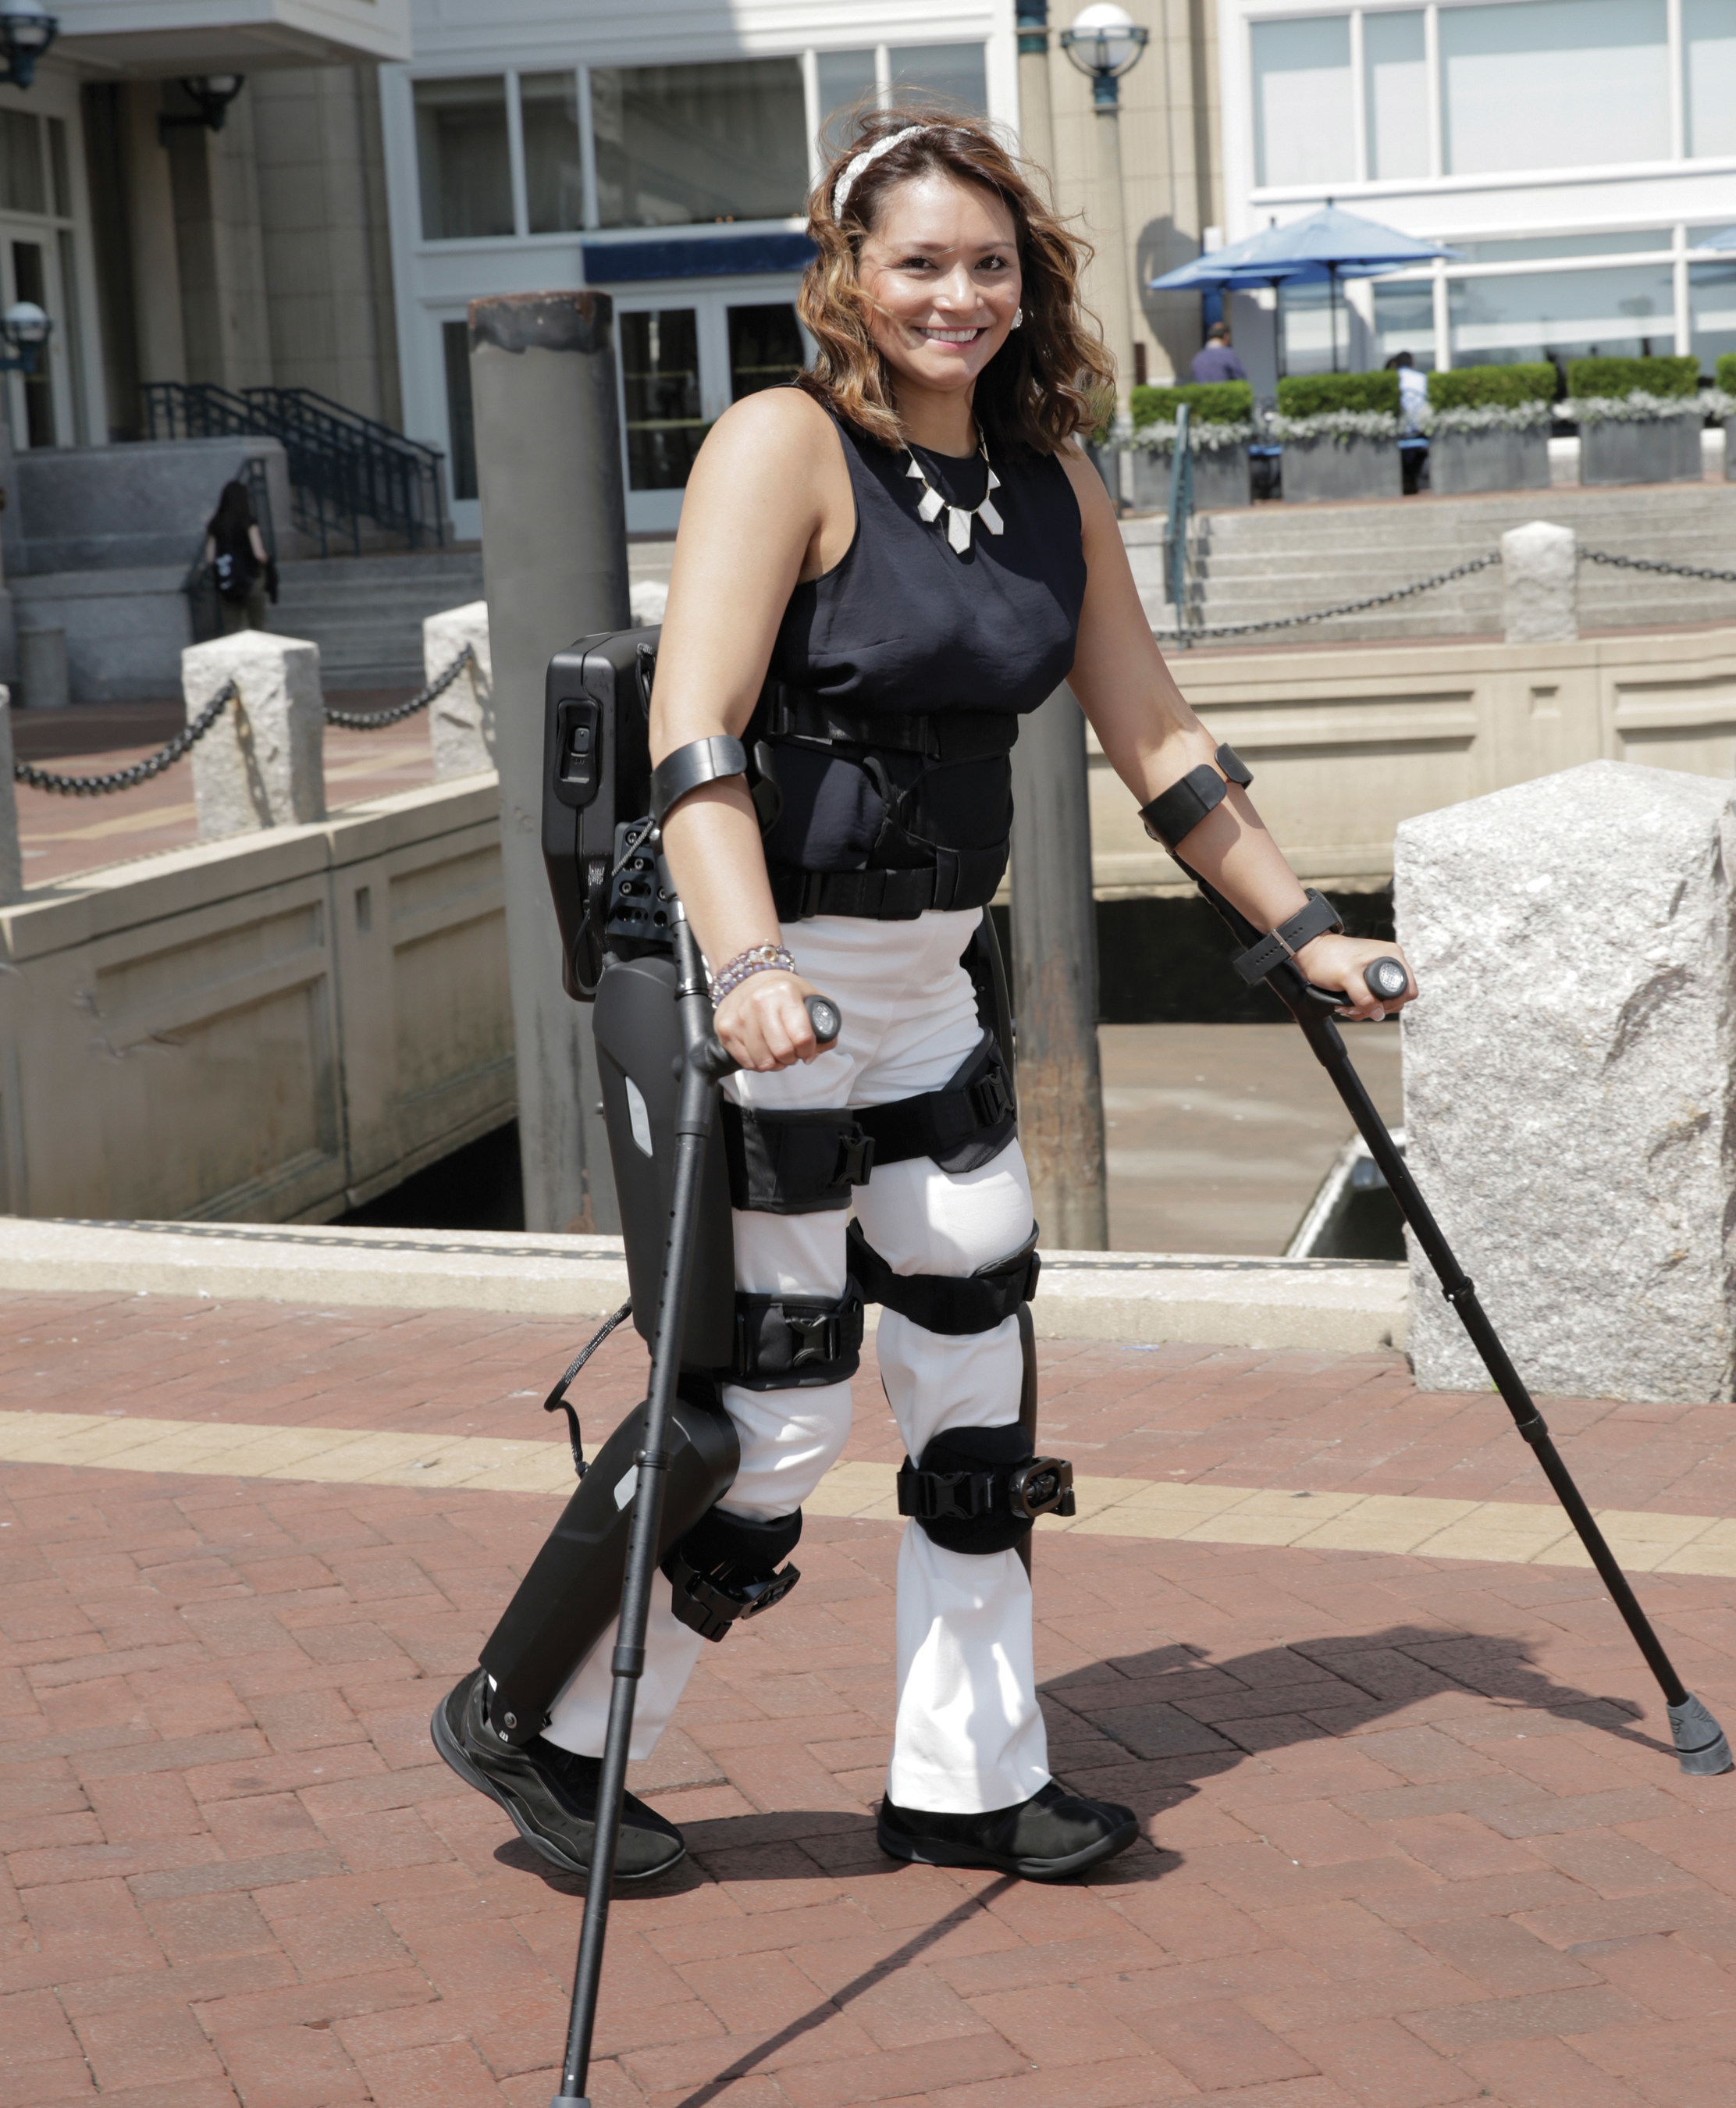 ReWalker Marcela Turnage demonstrates the new ReWalk Personal System 6.0, the sixth generation community use exoskeleton system.   The ReWalk Personal 6.0 offers those in the spinal cord injured community the most functional exoskeleton system with the fastest walking speed and the most precise fit, among many other key benefits.  ReWalk Robotics offers the only FDA cleared exoskeleton systems for rehabilitation and personal use in the U.S.